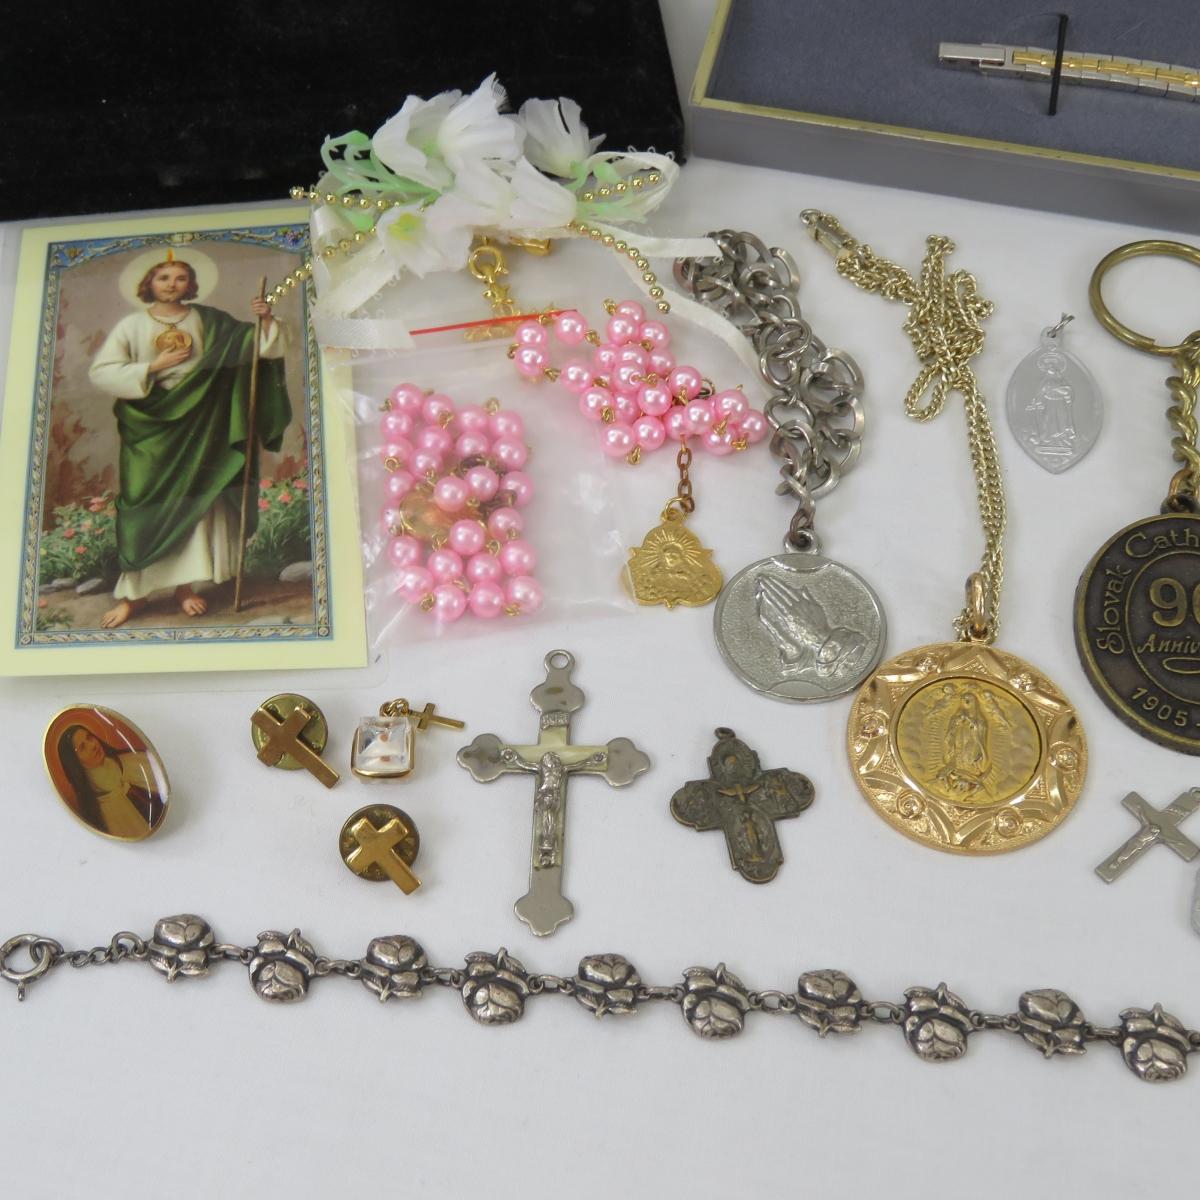 Helbros & 4 Vintage Watches with religious Jewelry